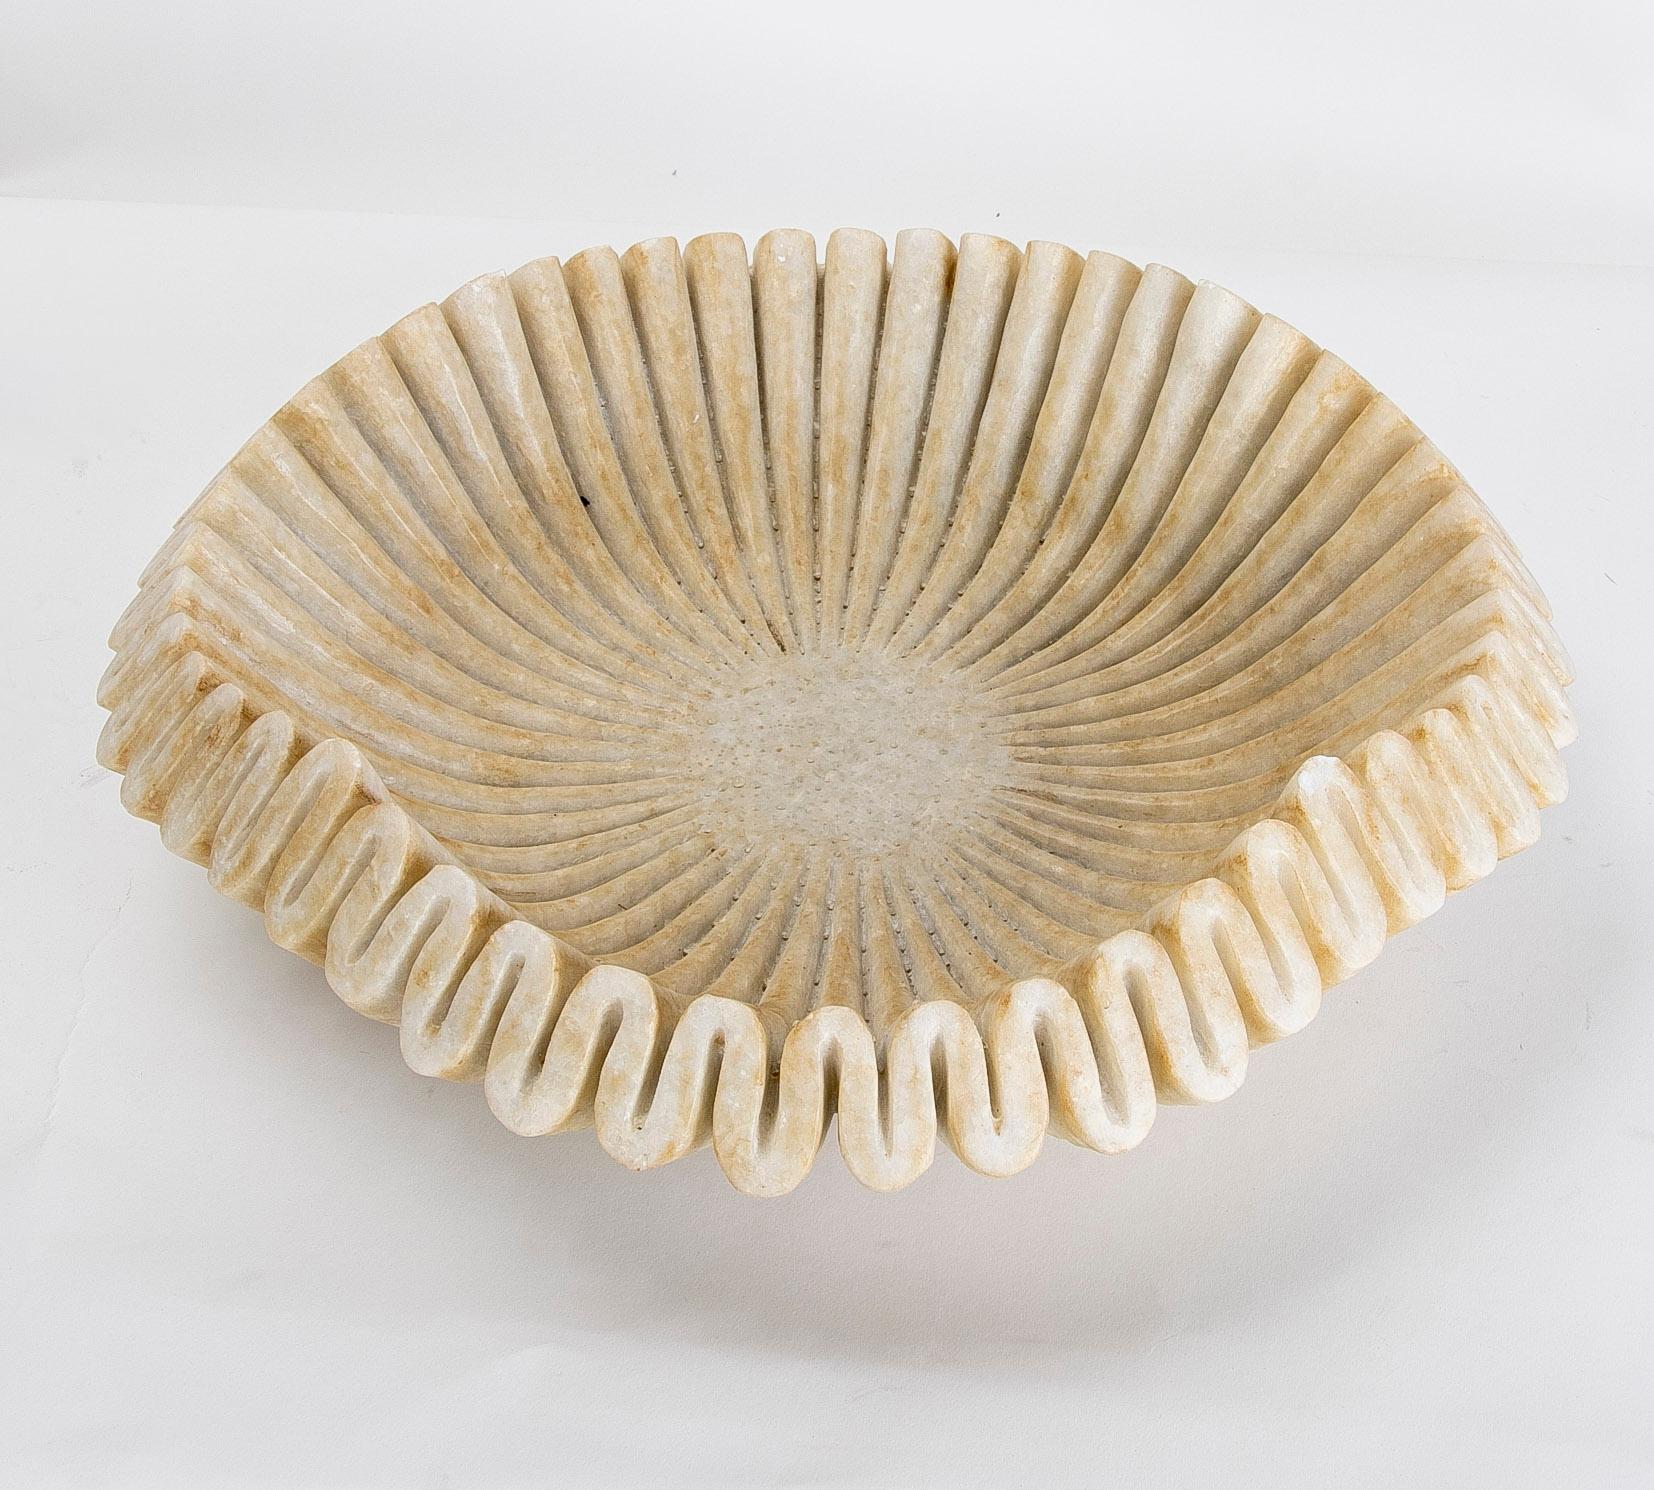 Hand-Carved White Marble Decorative Dish with Wavy Forms For Sale 8